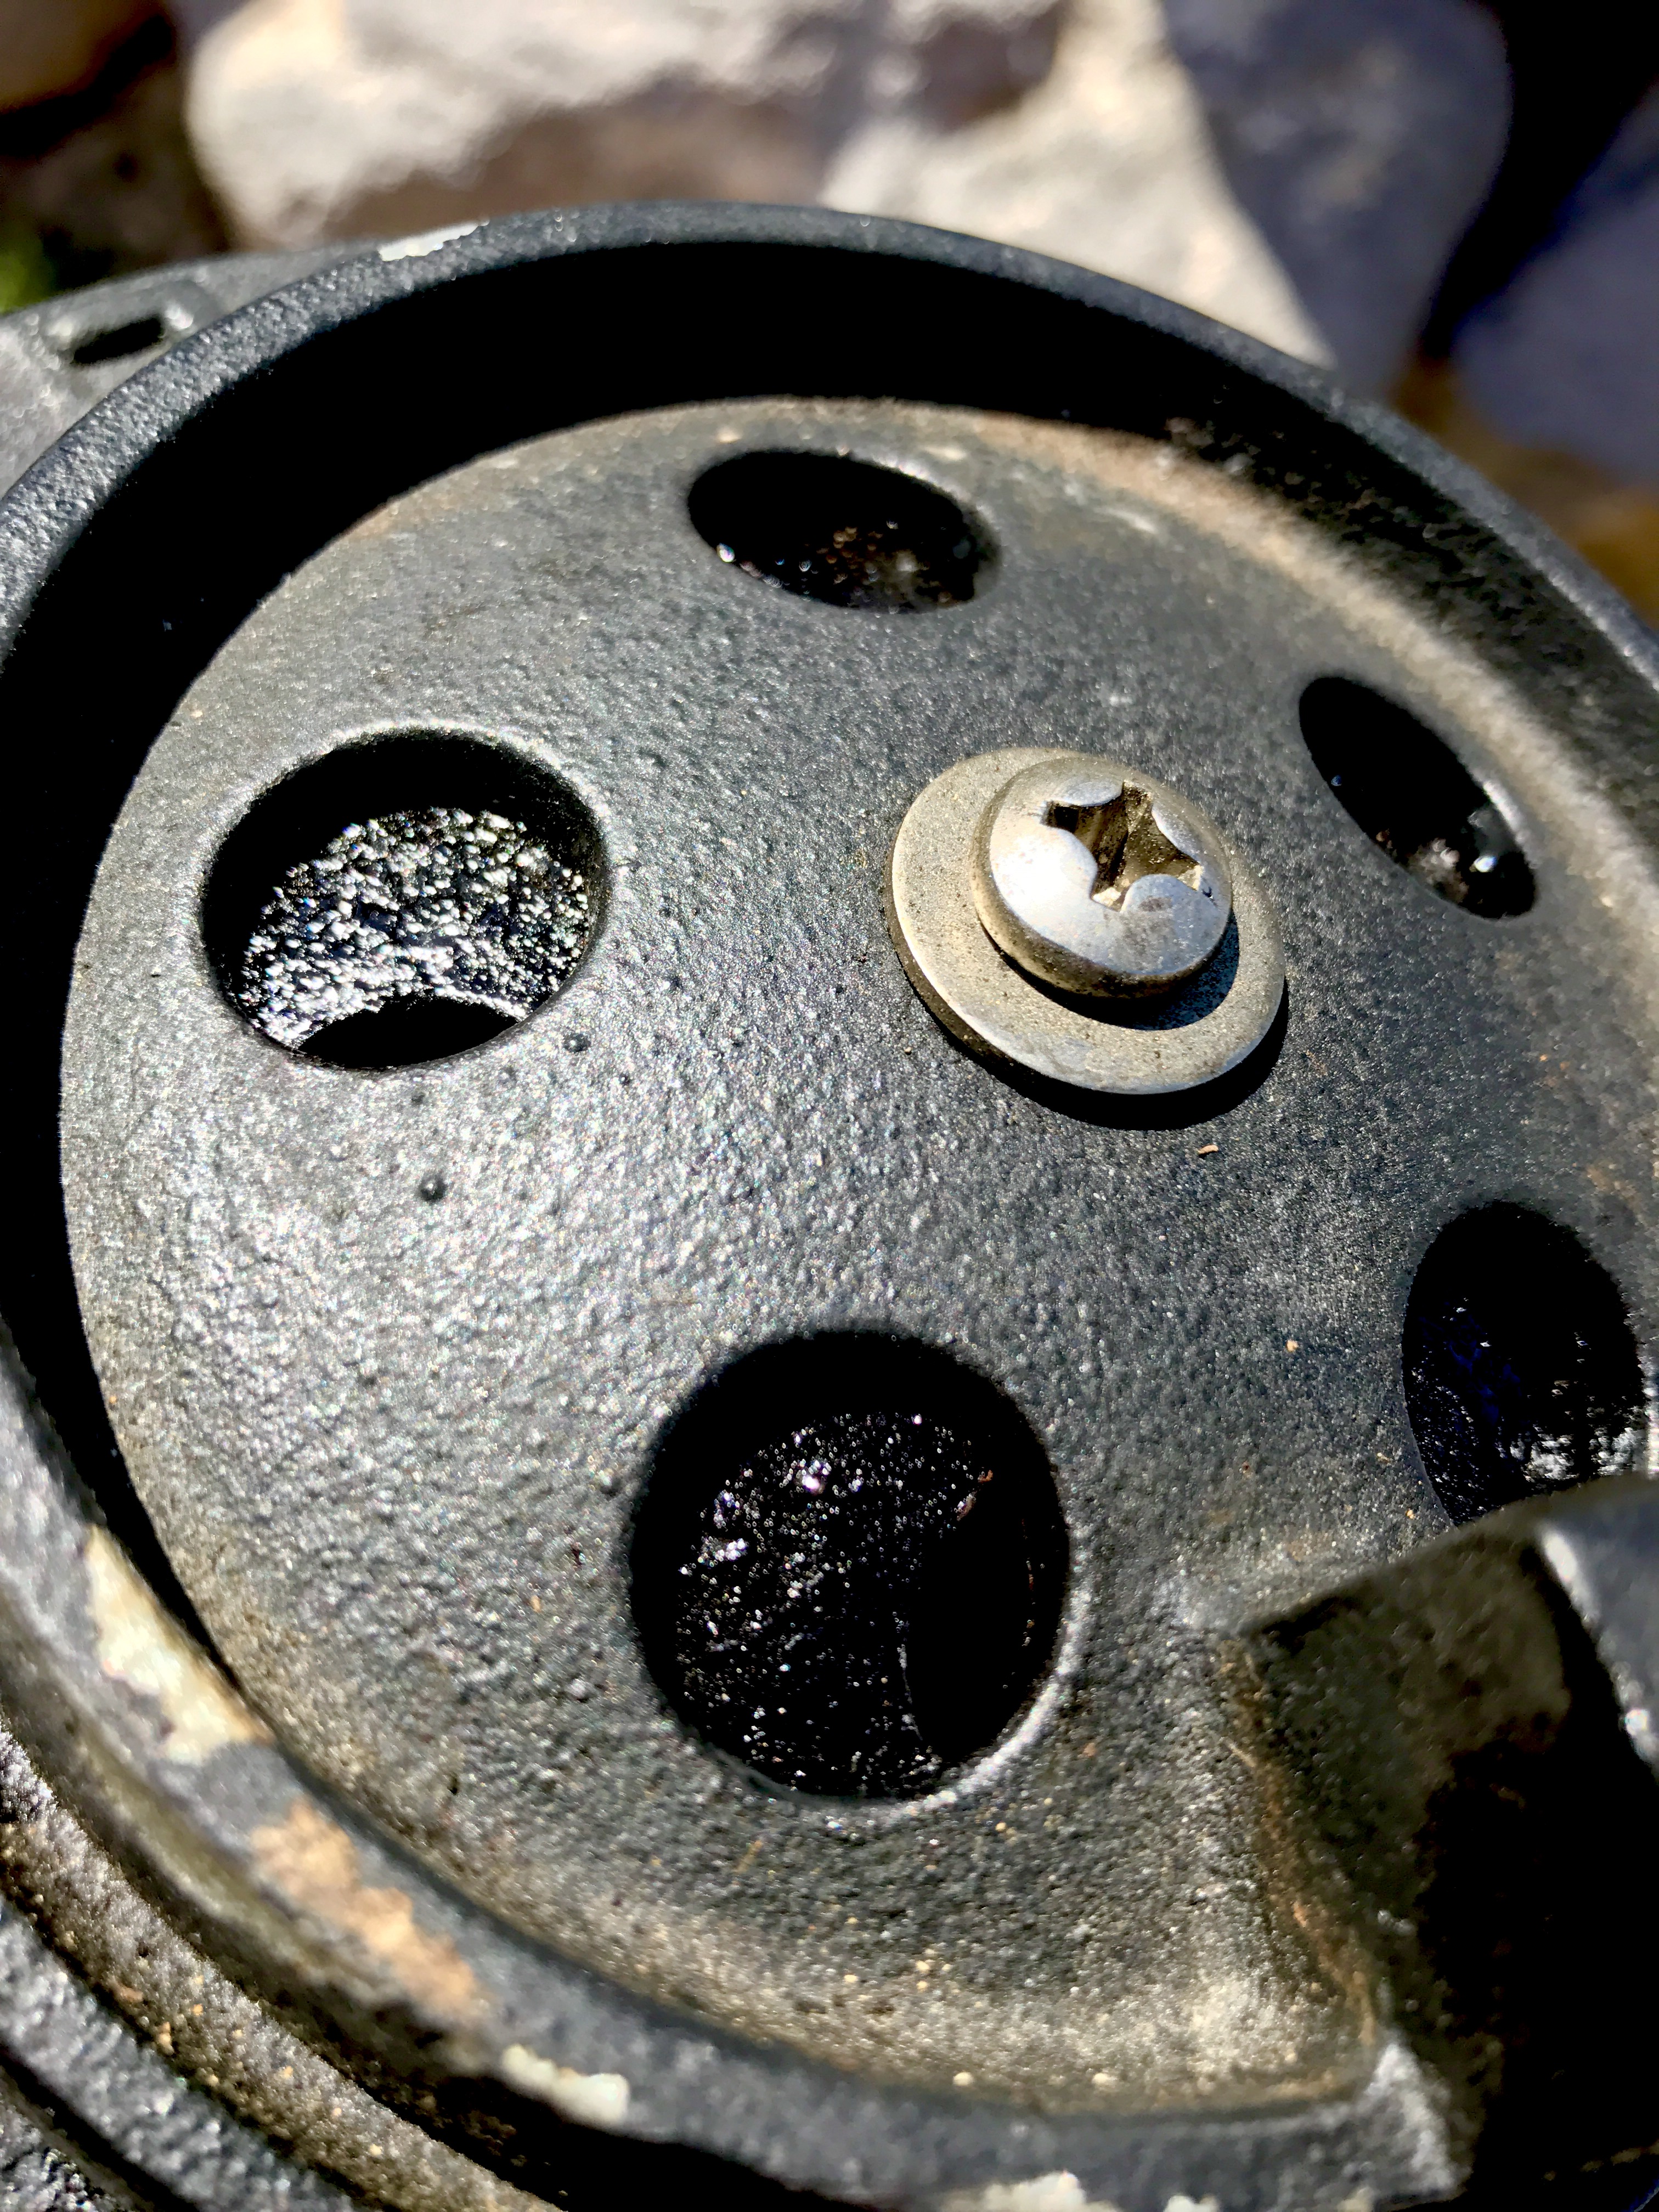 When using a ceramic grill, make sure the holes in the daisy wheel are slightly opened to best control temps. 